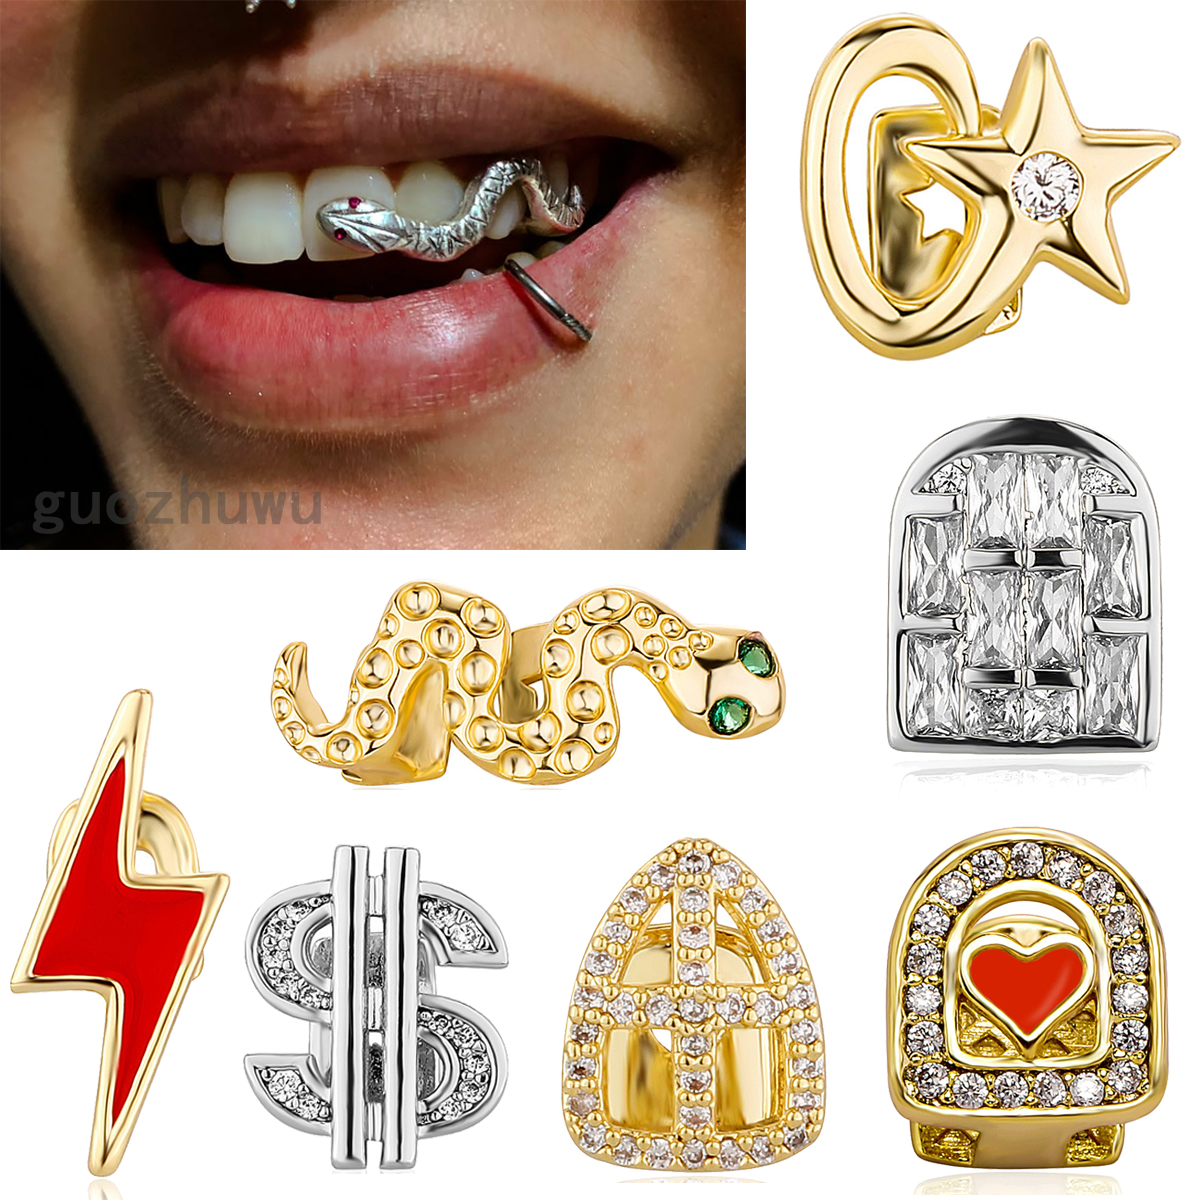 18K Gold Single Grillz Braces Hip Hop Iced Out Cubic Zirconia Snake Teeth Dental Mouth Fang Grills Tooth Cap Halloween Party Vampire Rapper Body Jewelry Wholesale